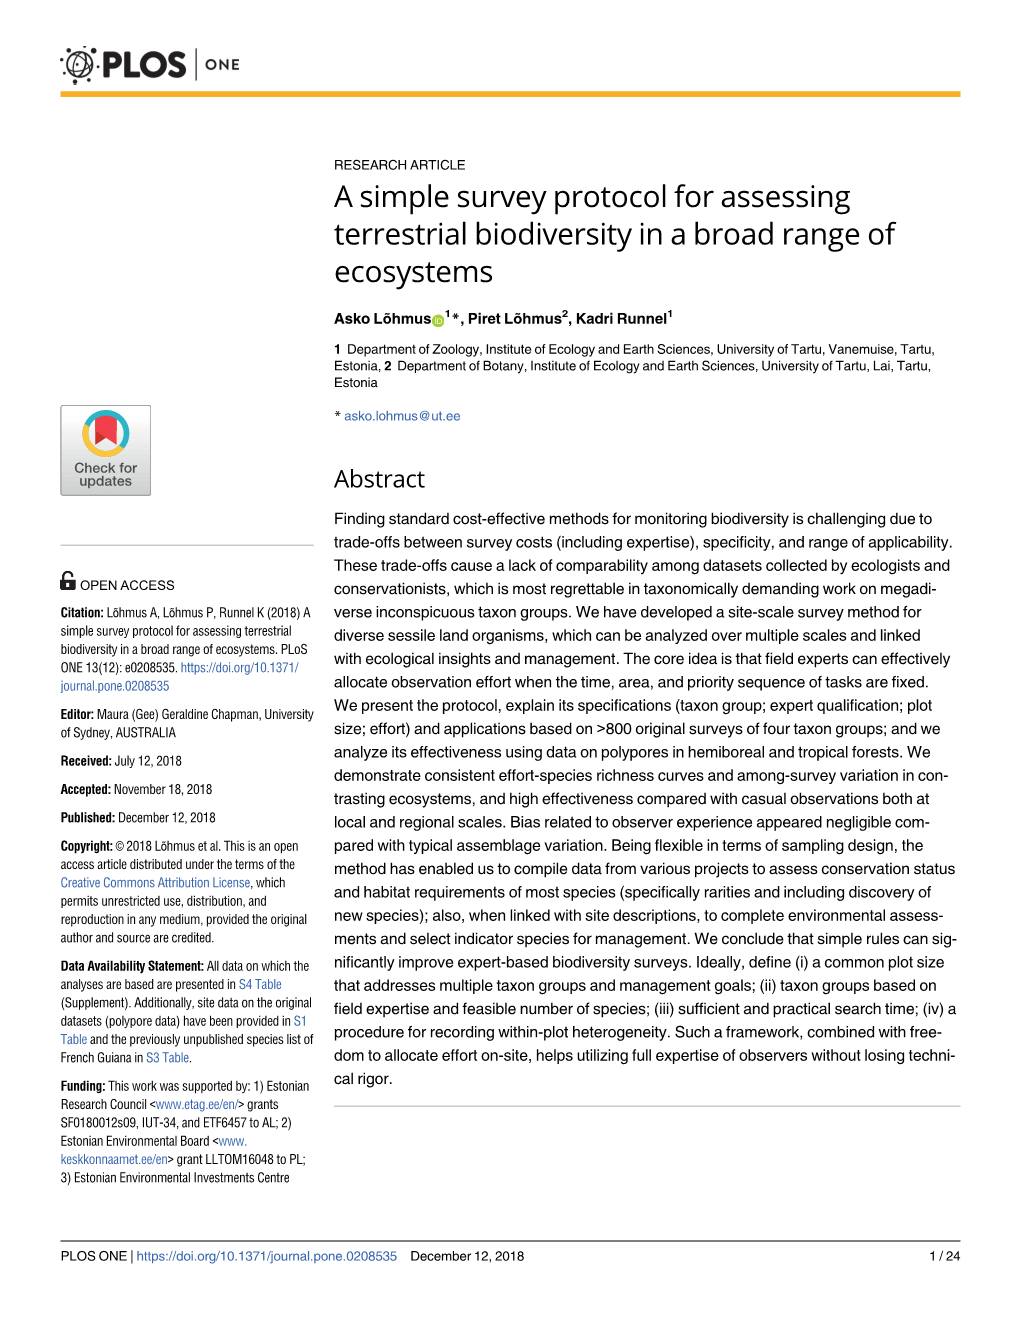 A Simple Survey Protocol for Assessing Terrestrial Biodiversity in a Broad Range of Ecosystems